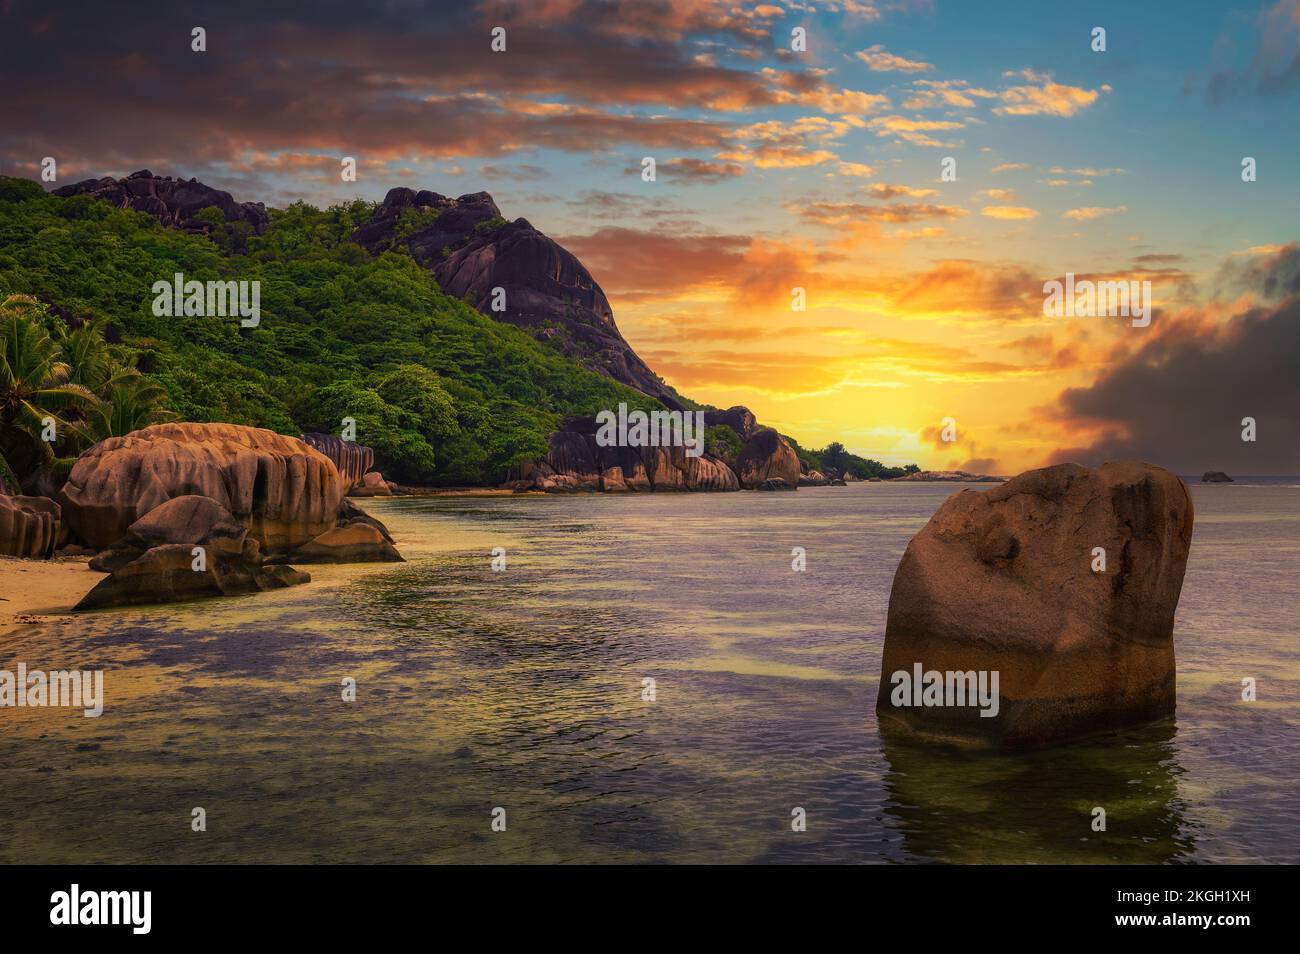 Colorful sunset over Anse Source D'argent beach at La Digue Island, Seychelles Stock Photo